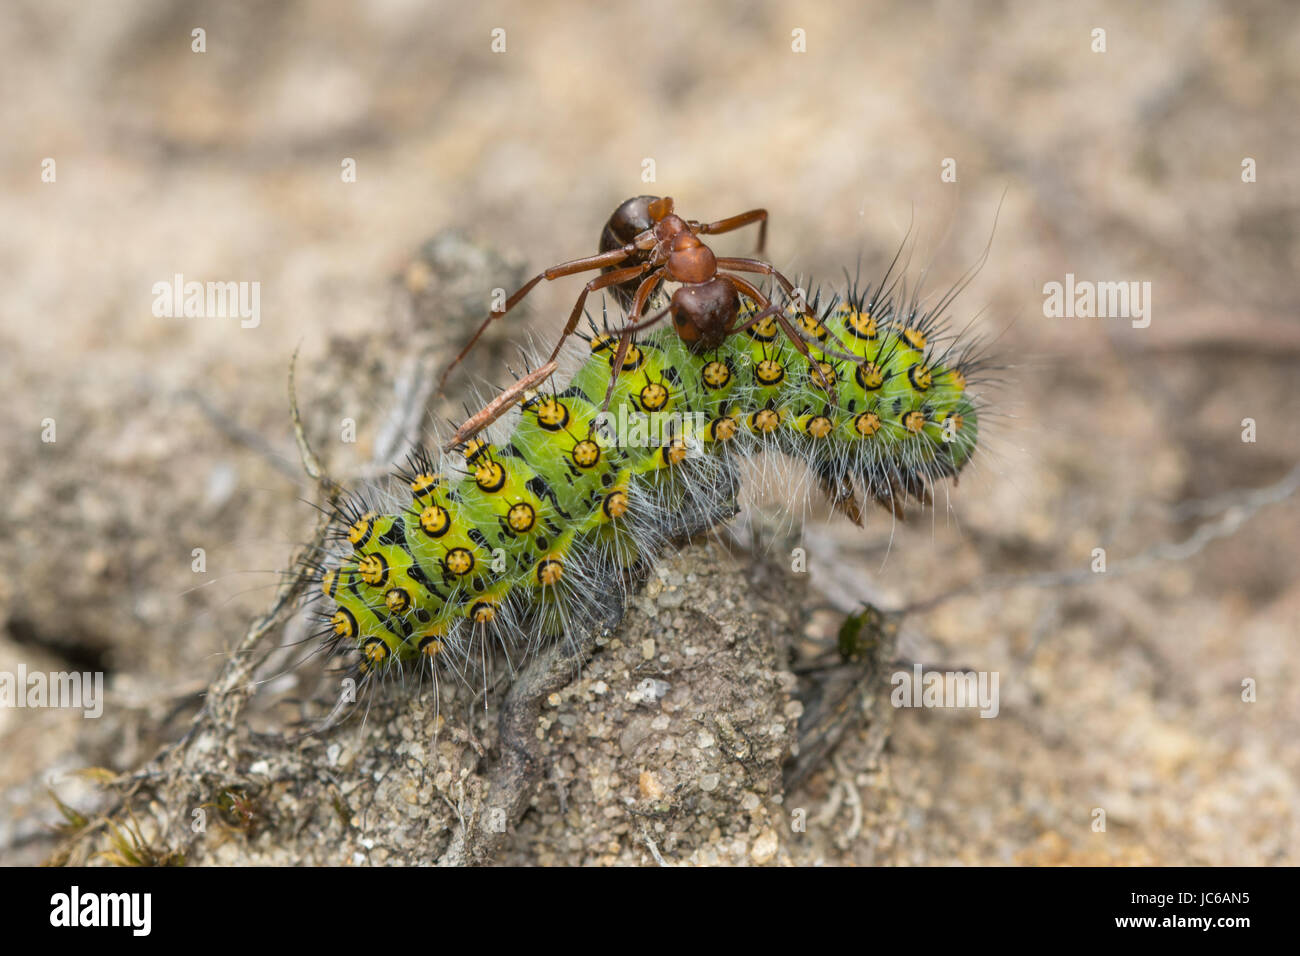 Close-up of emperor moth (Saturnia pavonia) caterpillar or larva being harassed by a wood ant in Surrey, UK Stock Photo